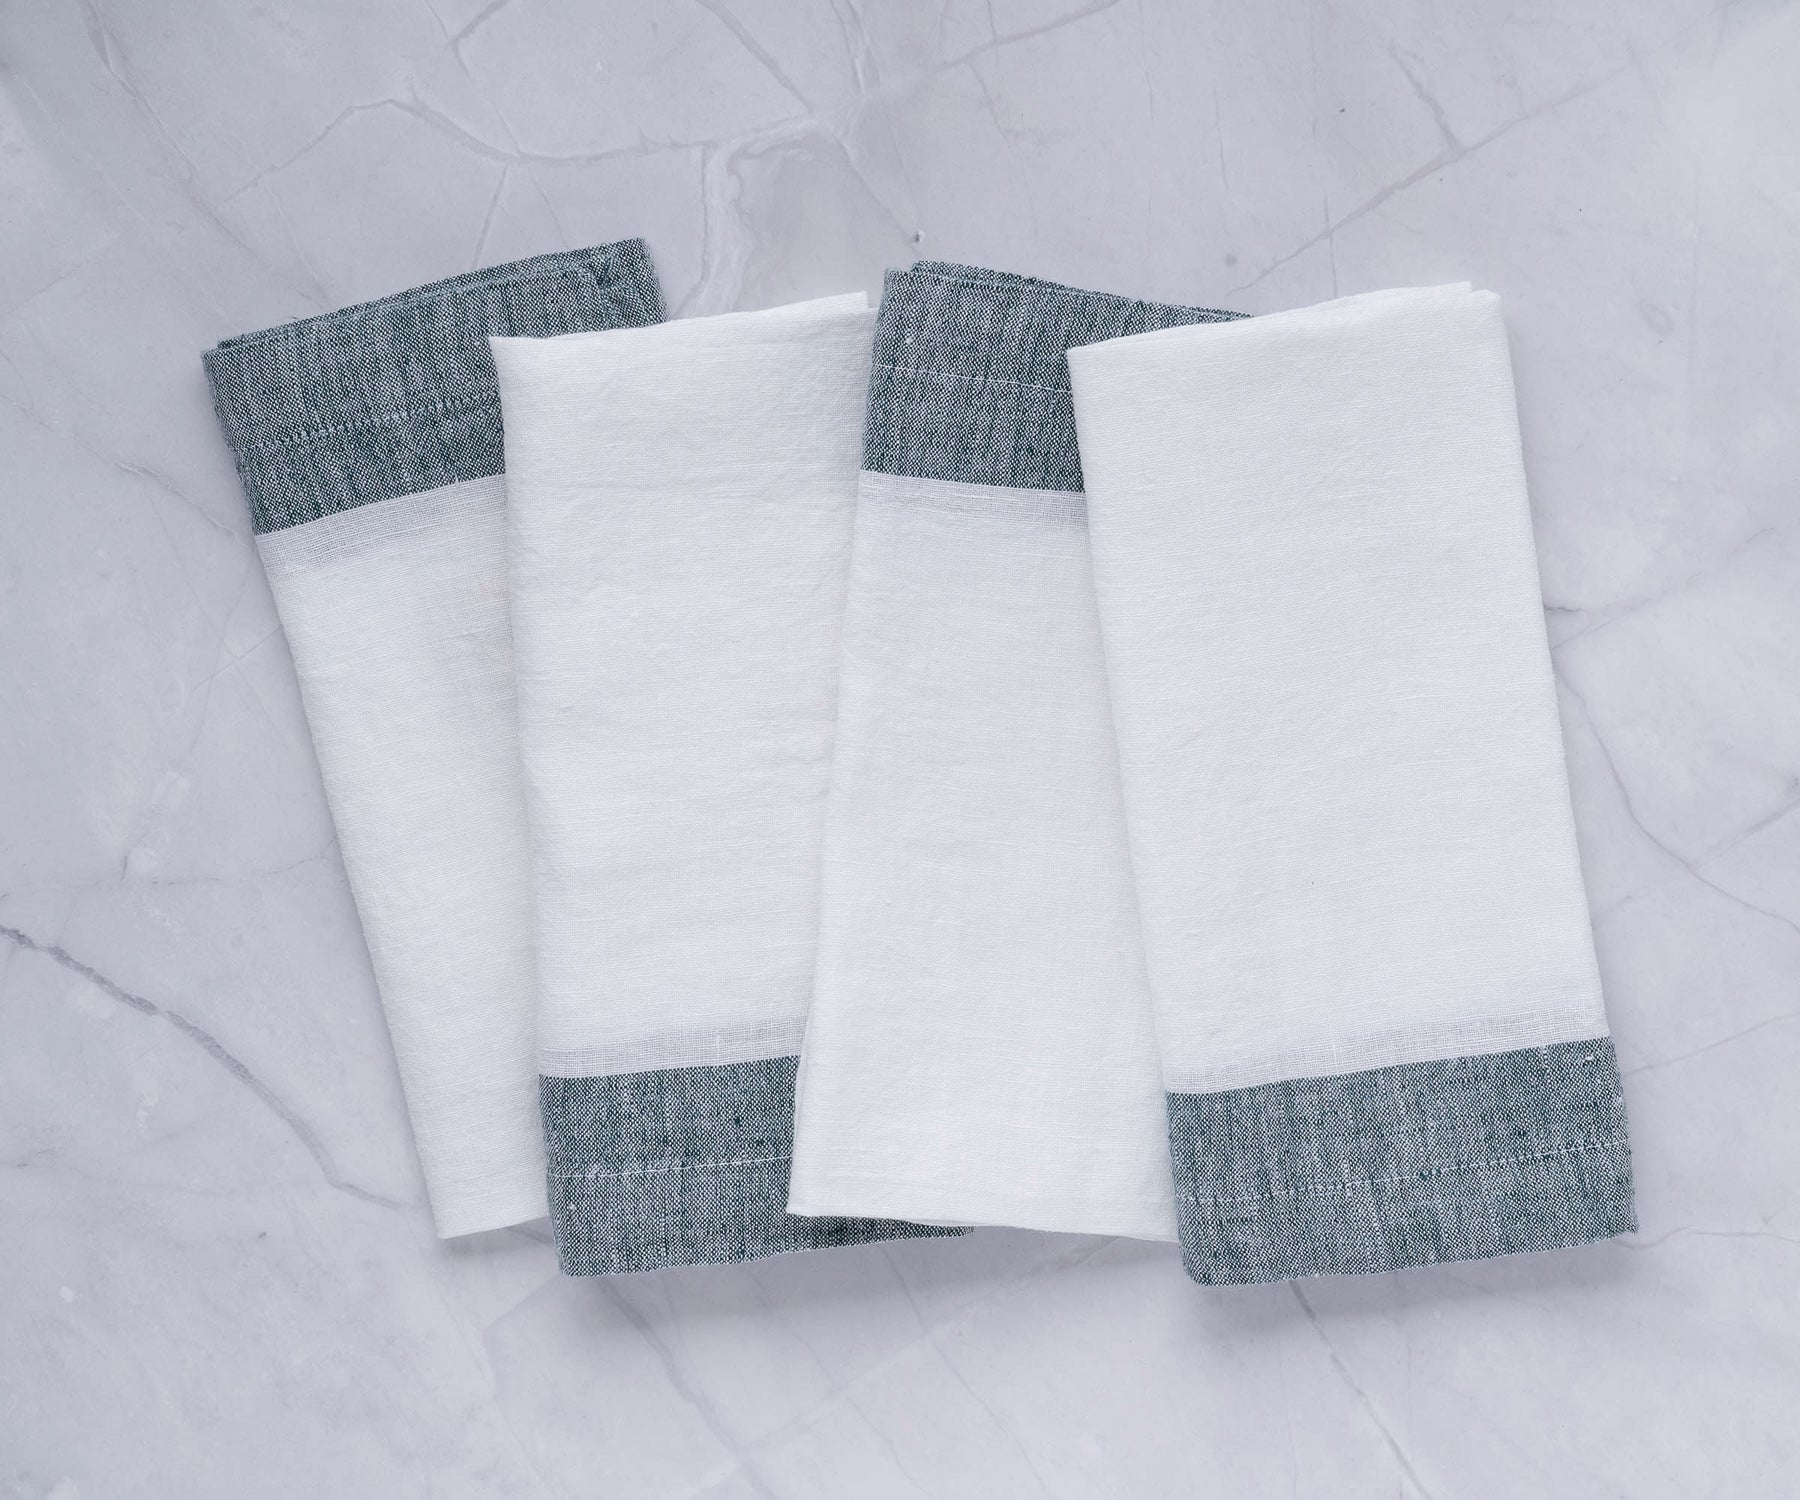 Simplify your shopping with our cloth napkins bulk options. Achieve a timeless and classic look with our white cloth napkins. Complete your table setting with our versatile cloth table napkins. Stock up and save with our bulk cloth napkins.